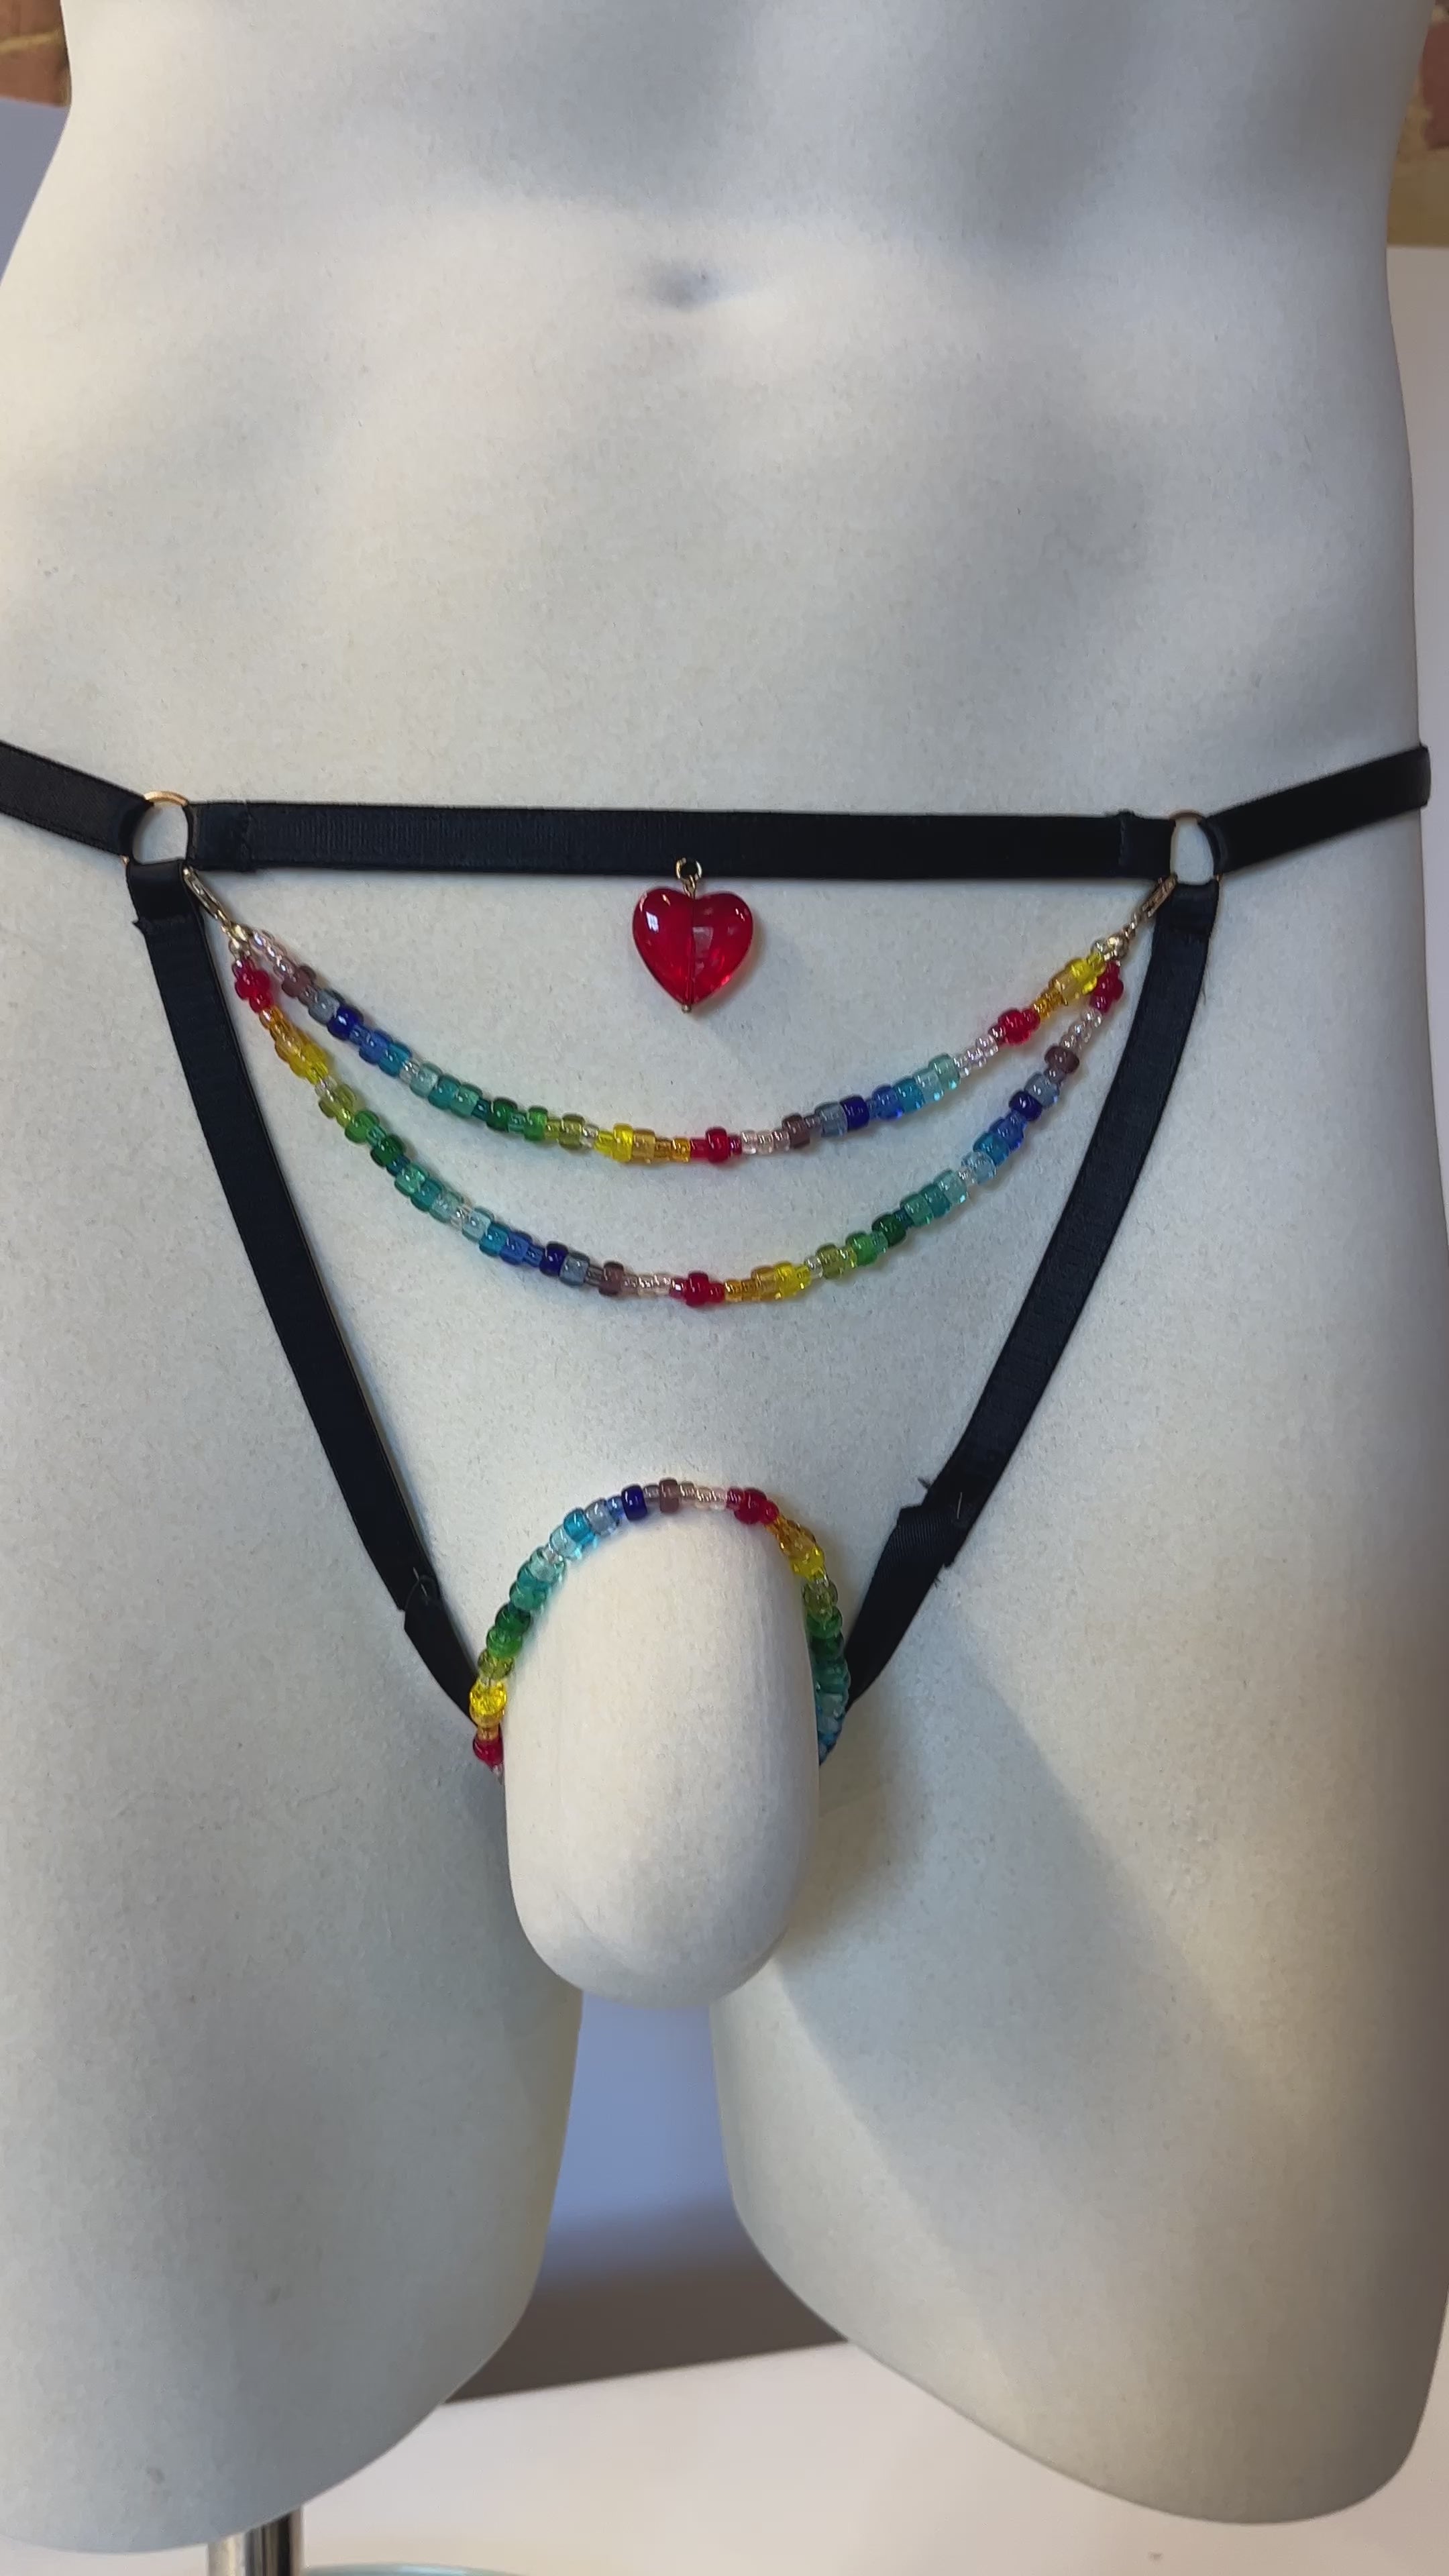 Beaded jewellery thong for men by Moot Lingerie, Erotic thong for men , sexy mens underwear, fetish wear, kinky toys for men, sexy thong for him, beaded thong, hot lingerie for men, g strings for him, kink wear for men, men sex party wear, outfits for kinky parties, what to wear to an orgy, what to wear to swingers club, sex party outfit, sexy men